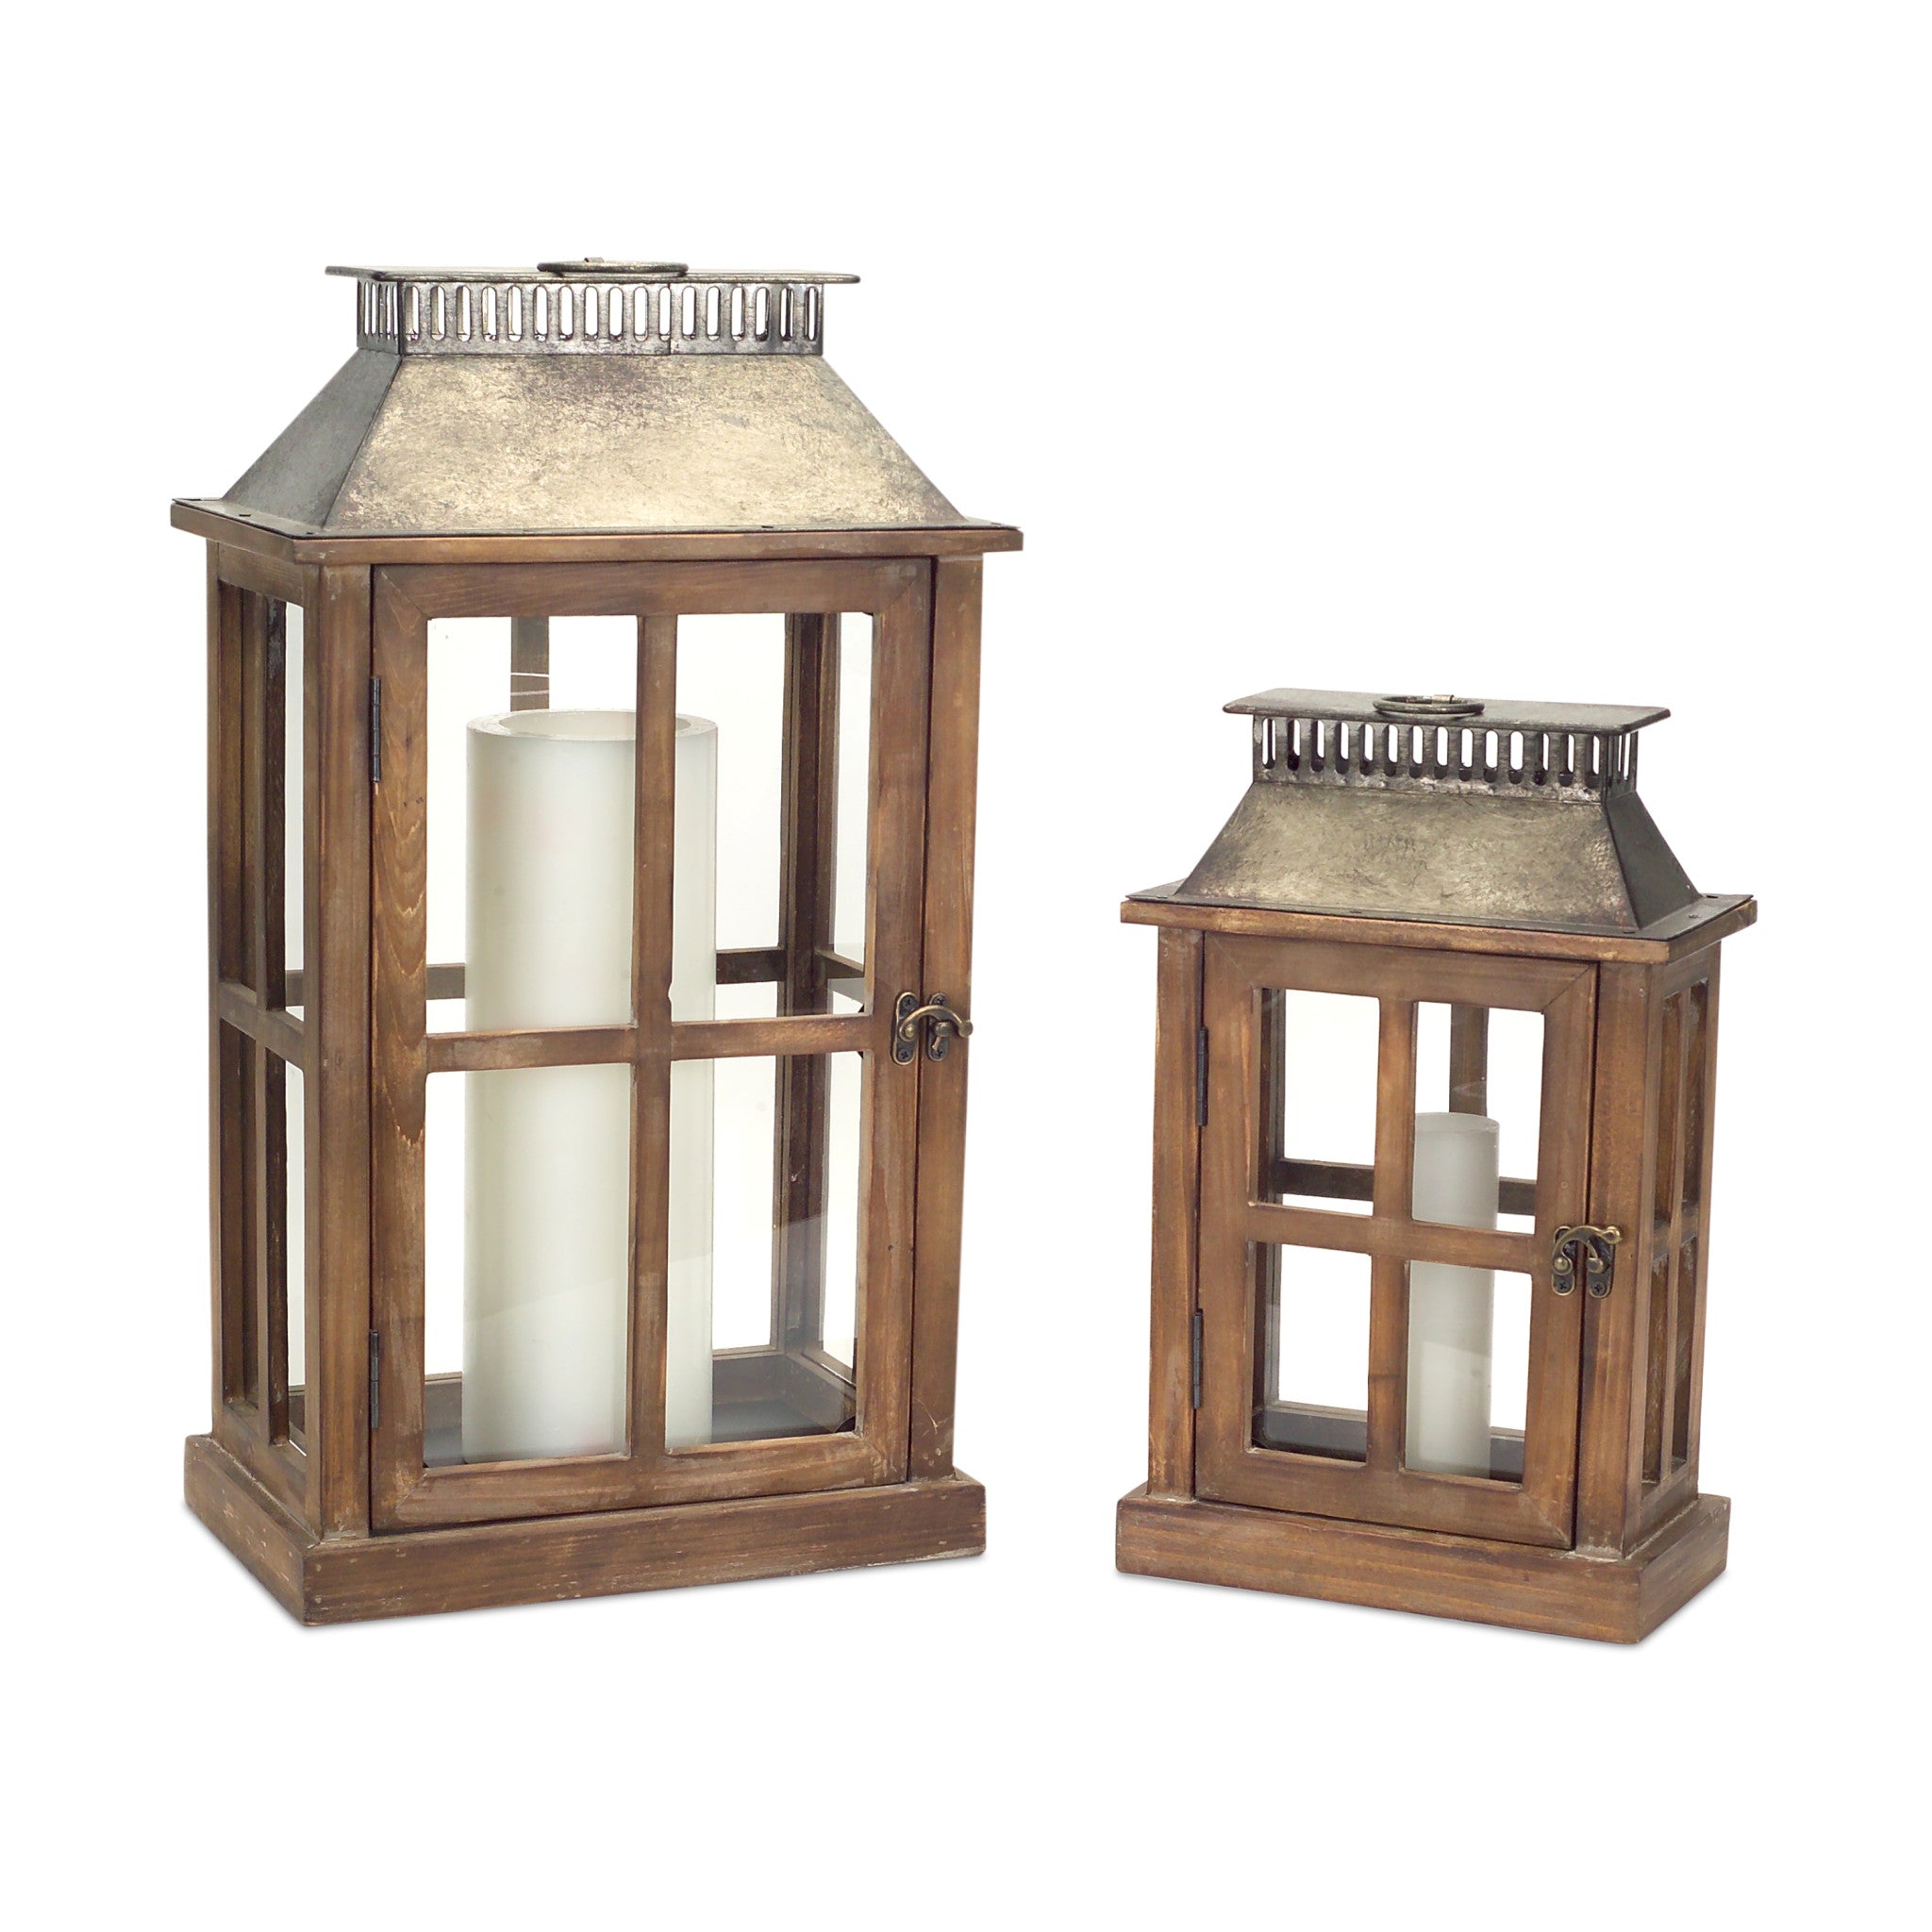 Set-Of-Two-Brown-Flameless-Floor-Lantern-Candle-Holder-Candle-Holders